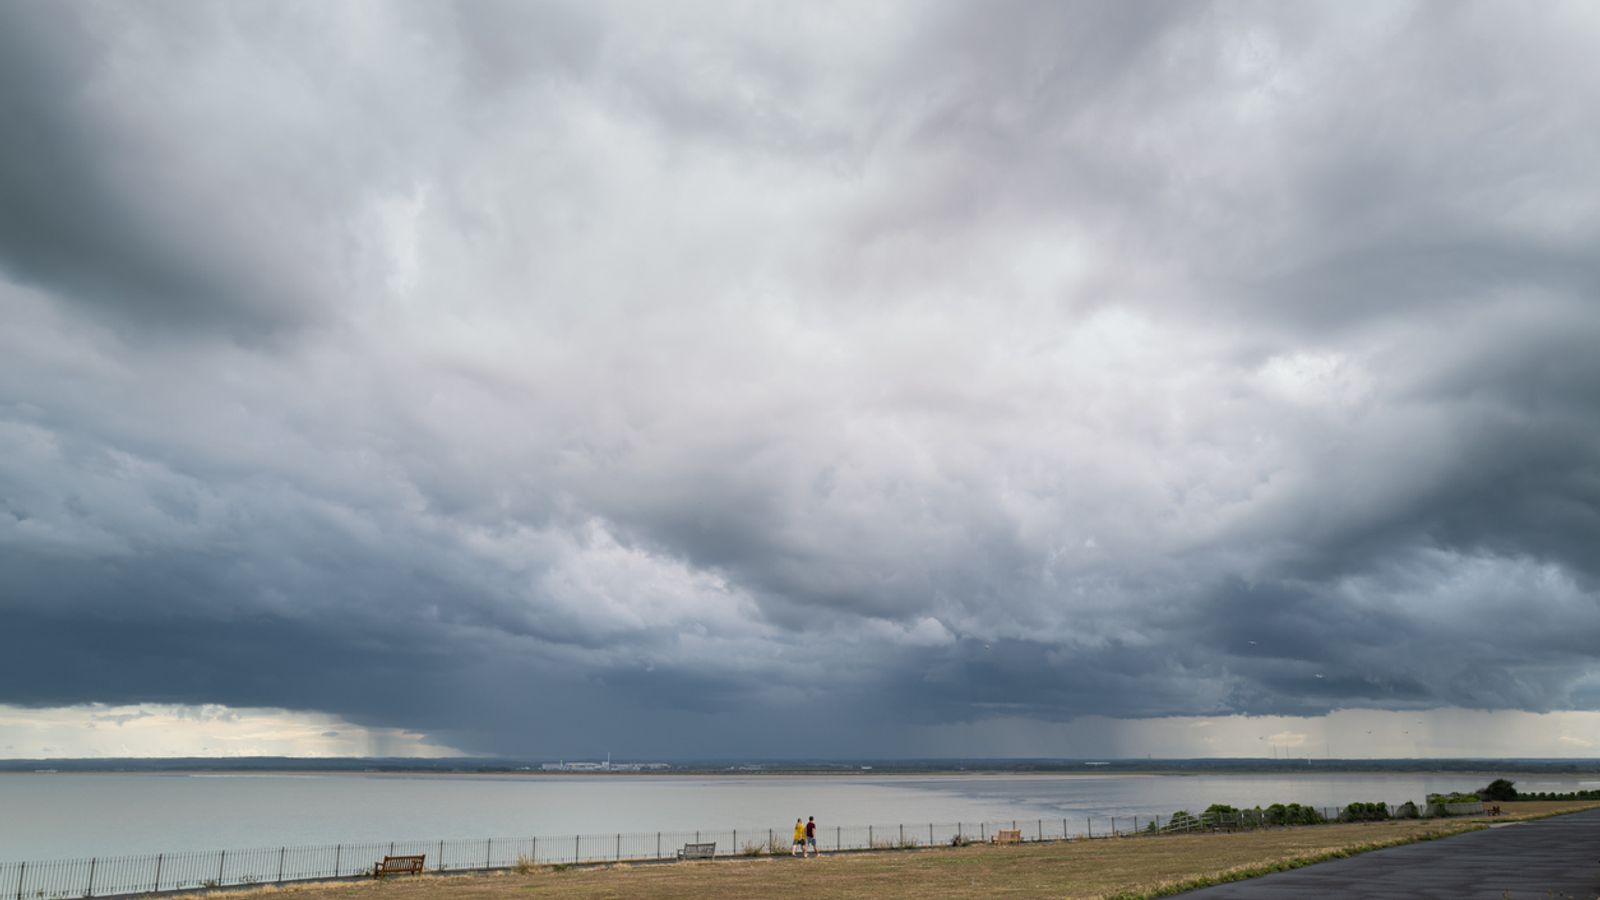 Met Office issues weather warnings for thunderstorms covering large parts of UK including London, Brighton and Cardiff